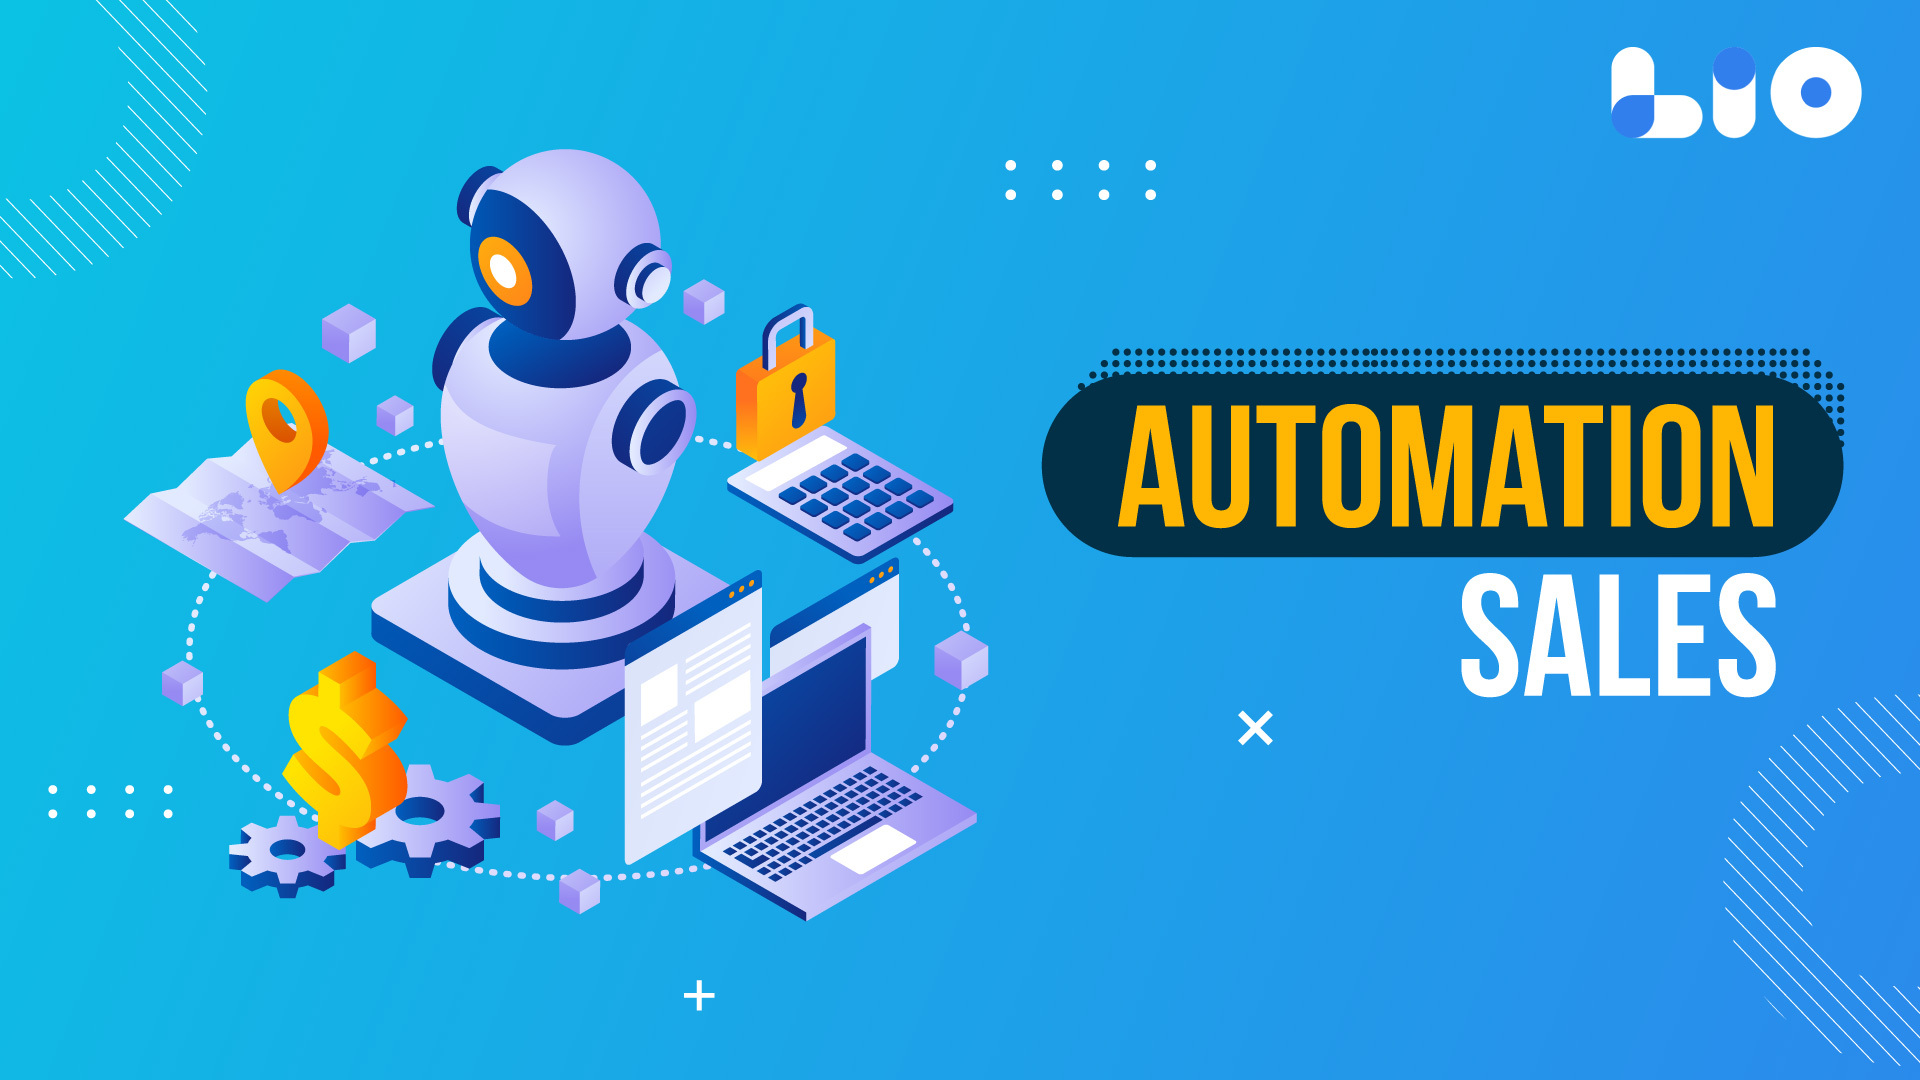 Automation Sales: How Automation is Revolutionizing the Sales Process